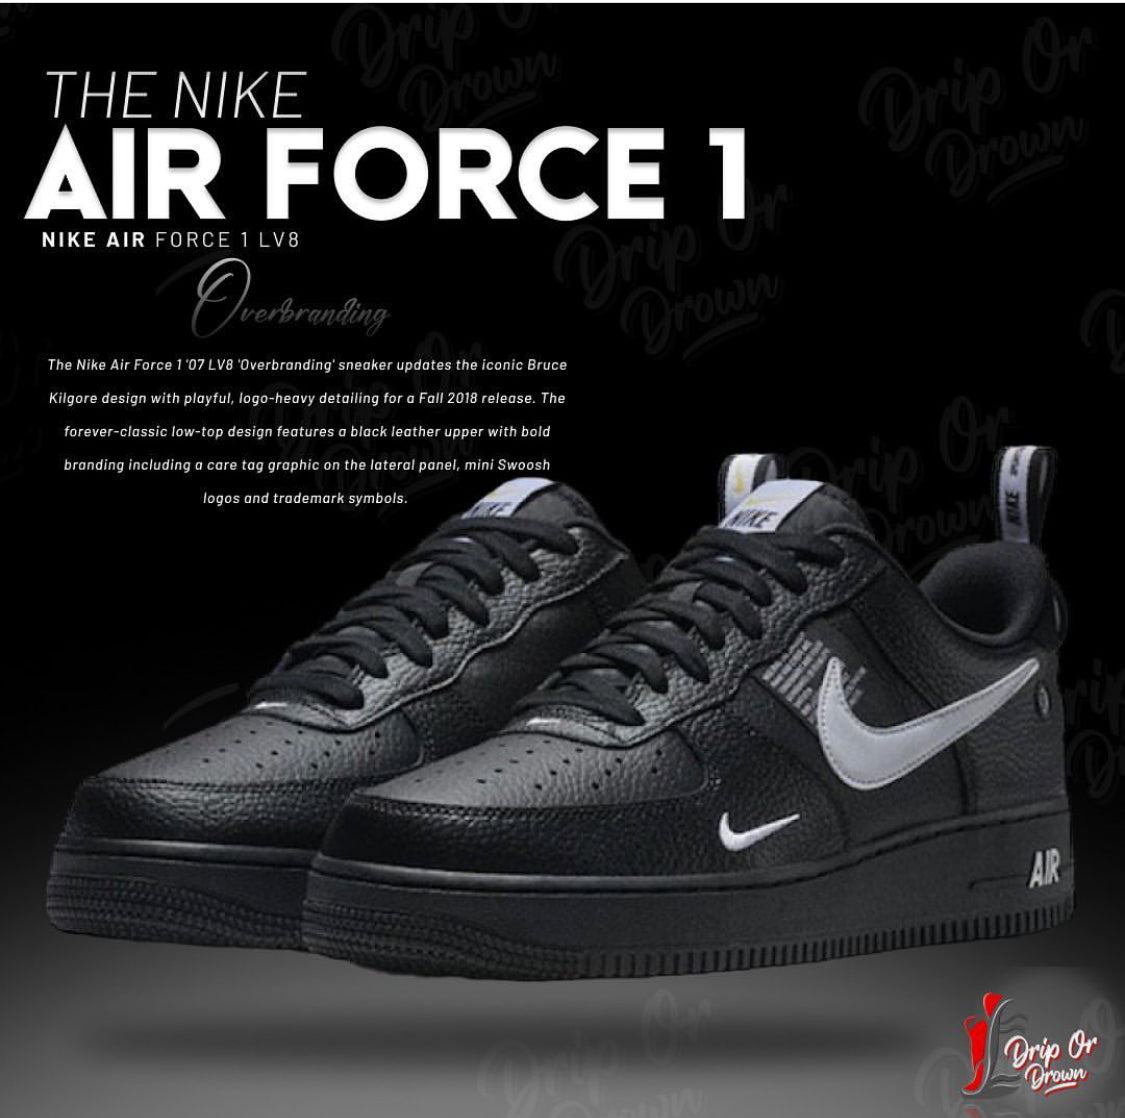 AIRFORCE 1 OVER-BRANDING – Drip Or Drown